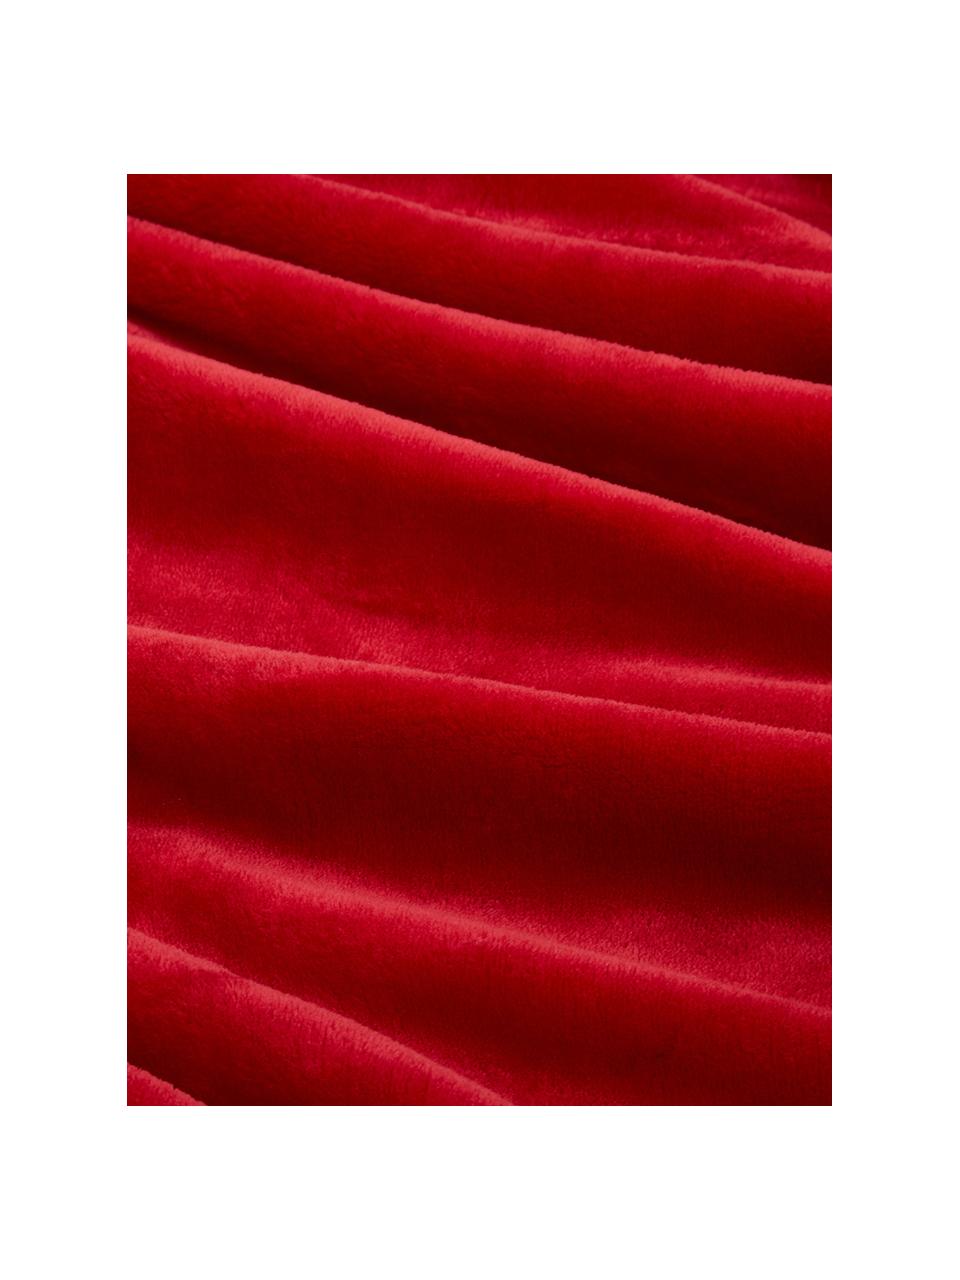 Plaid in morbido pile rosso Doudou, Poliestere, Rosso, Larg. 130 x Lung. 160 cm